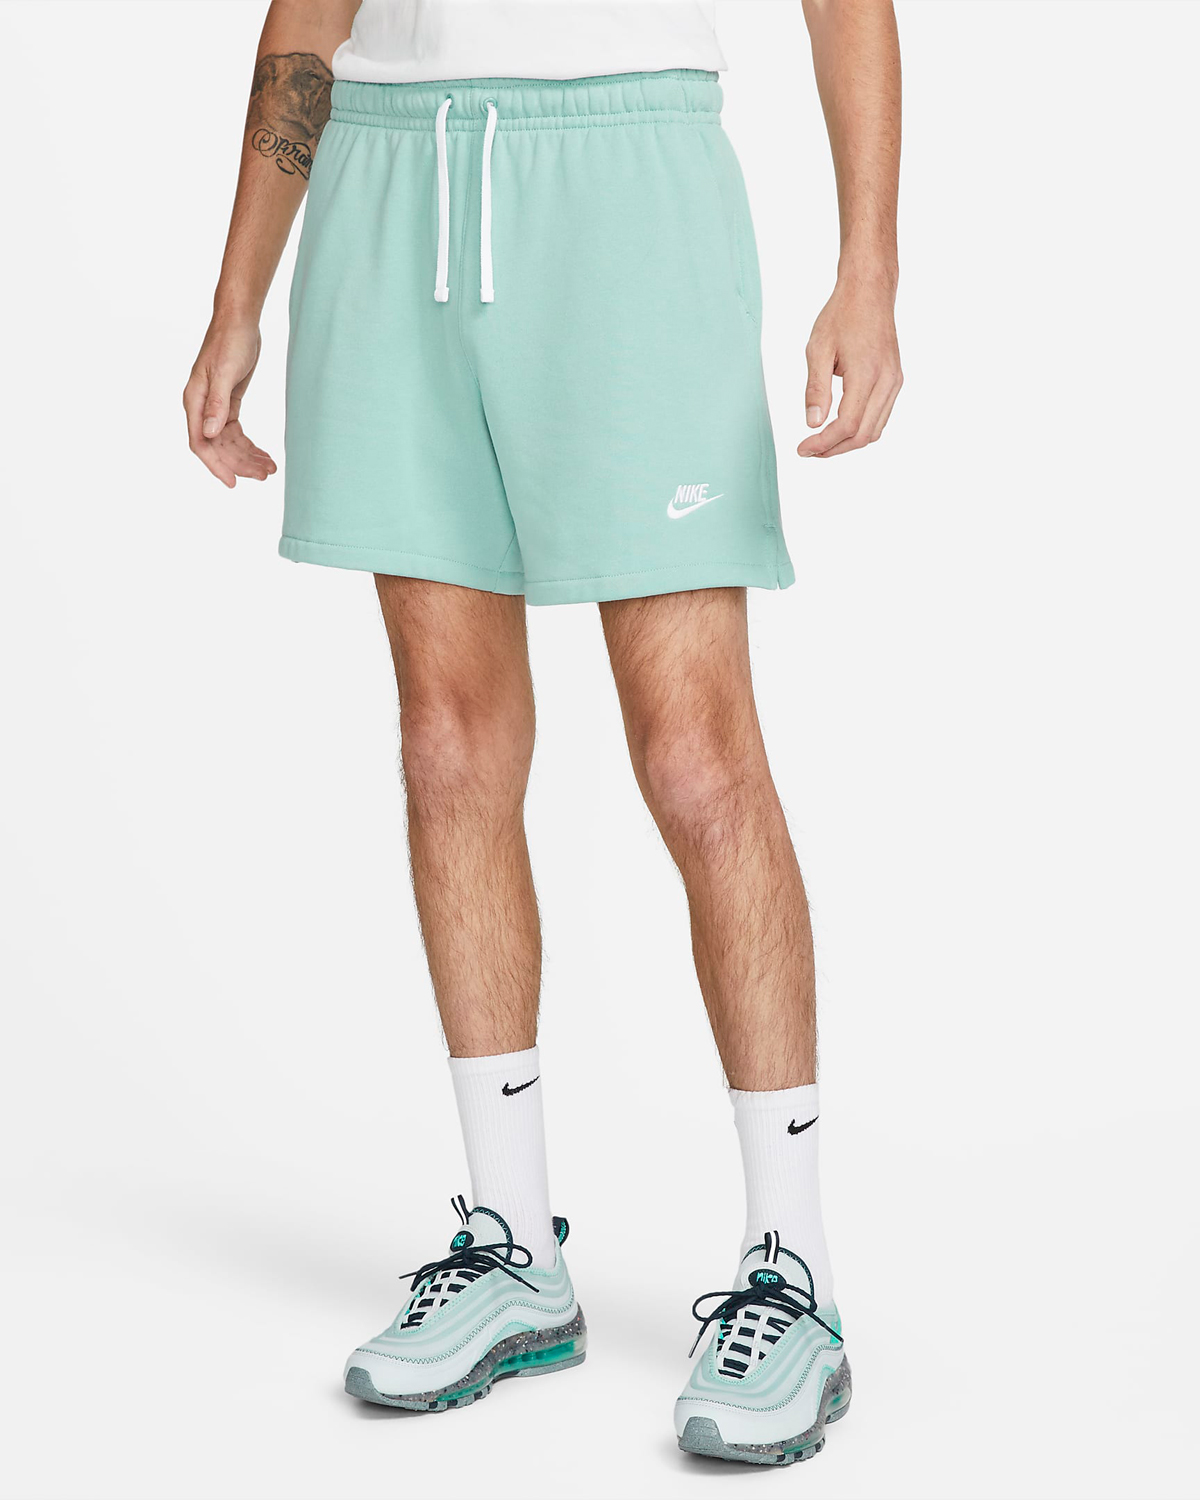 Nike-Club-Fleece-French-Terry-Flow-Shorts-Mineral